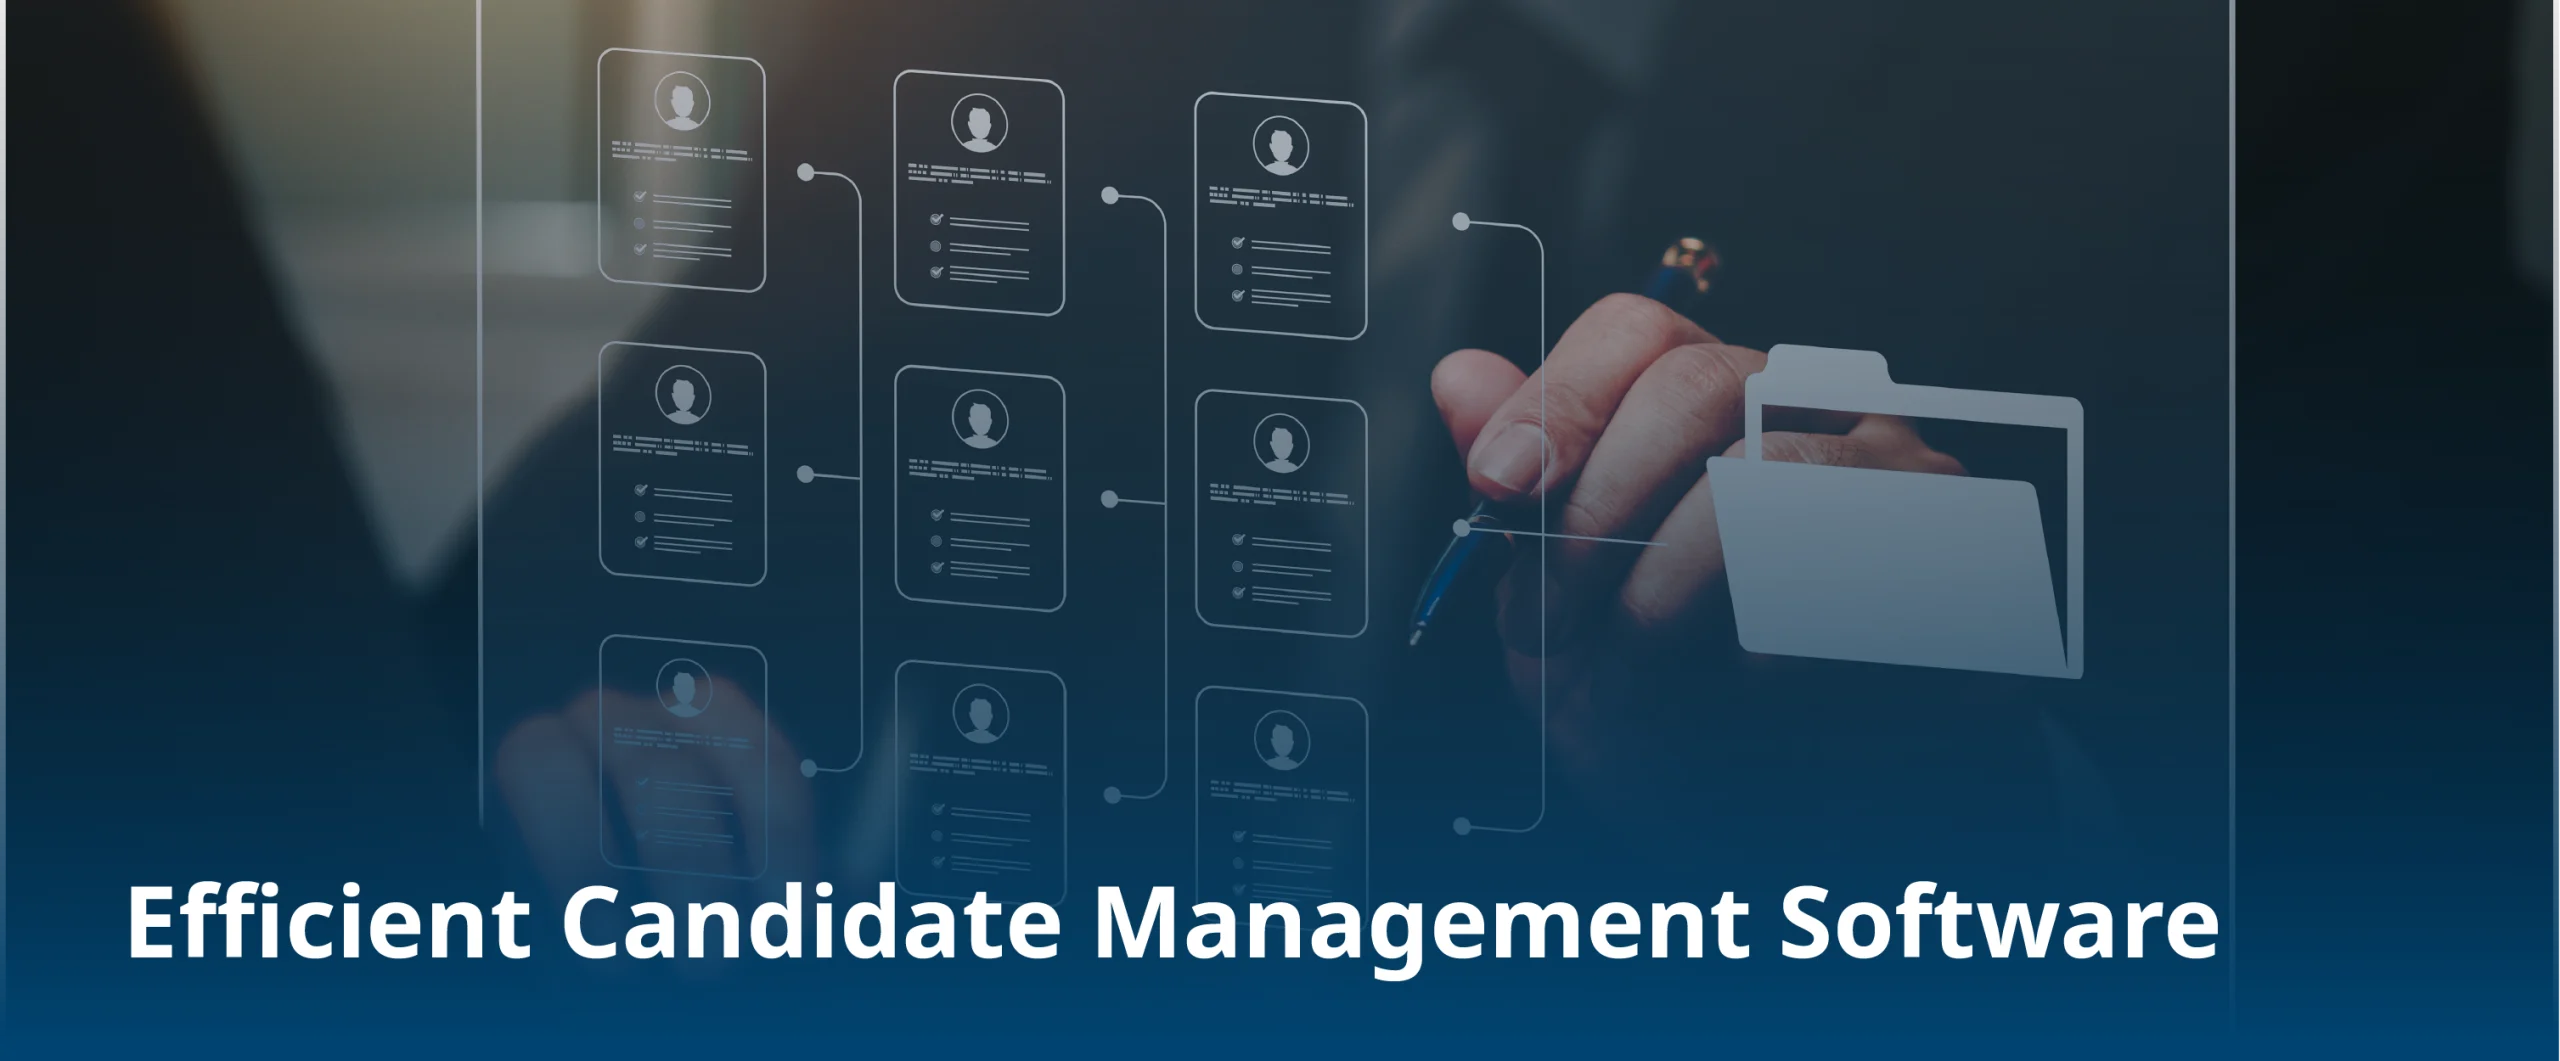 Candidate Management Software: Efficiently Manage and Track Your Talent Pool